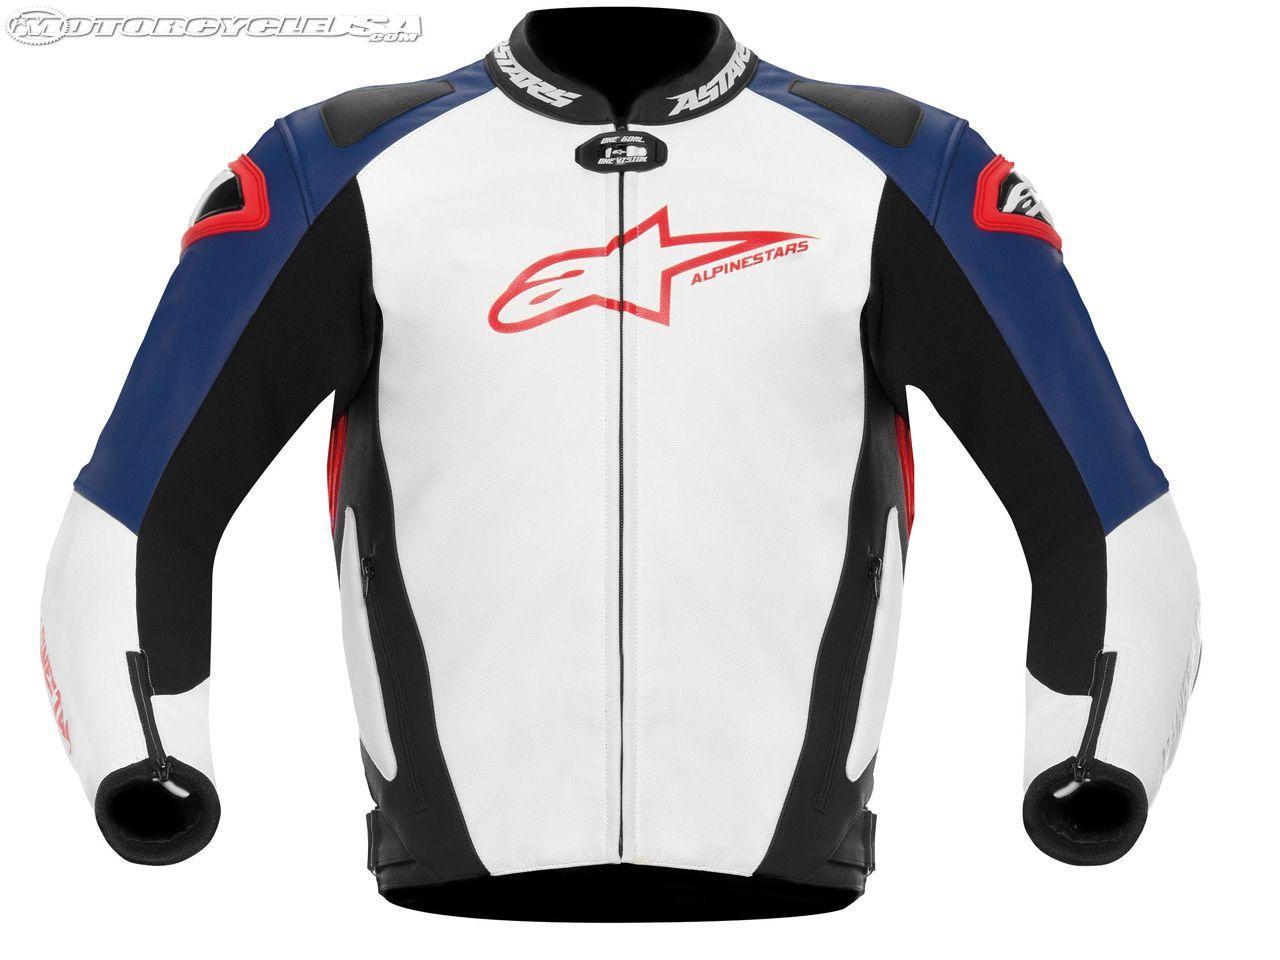 Alpinestars Fall 2012 Line Photo Gallery Picture 4 of 33